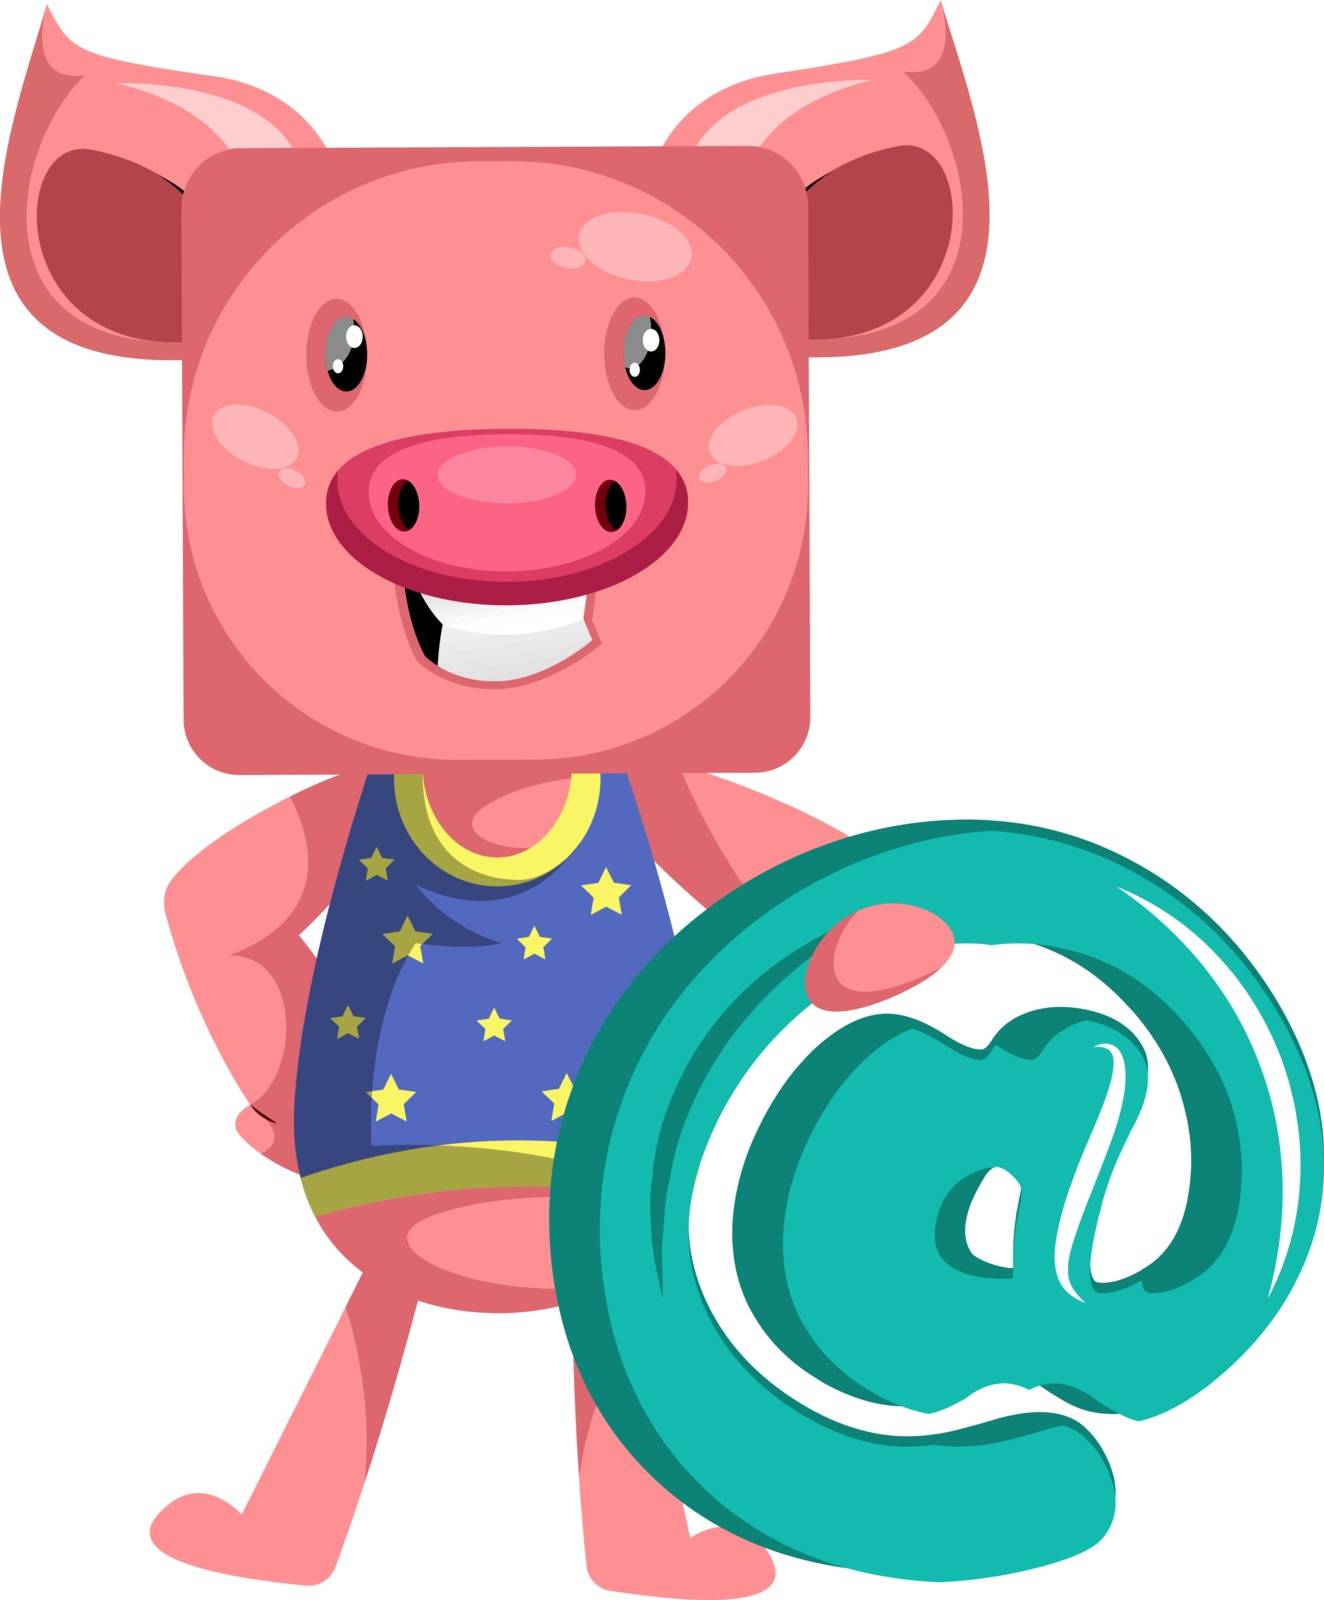 Pig with @ sign, illustration, vector on white background.